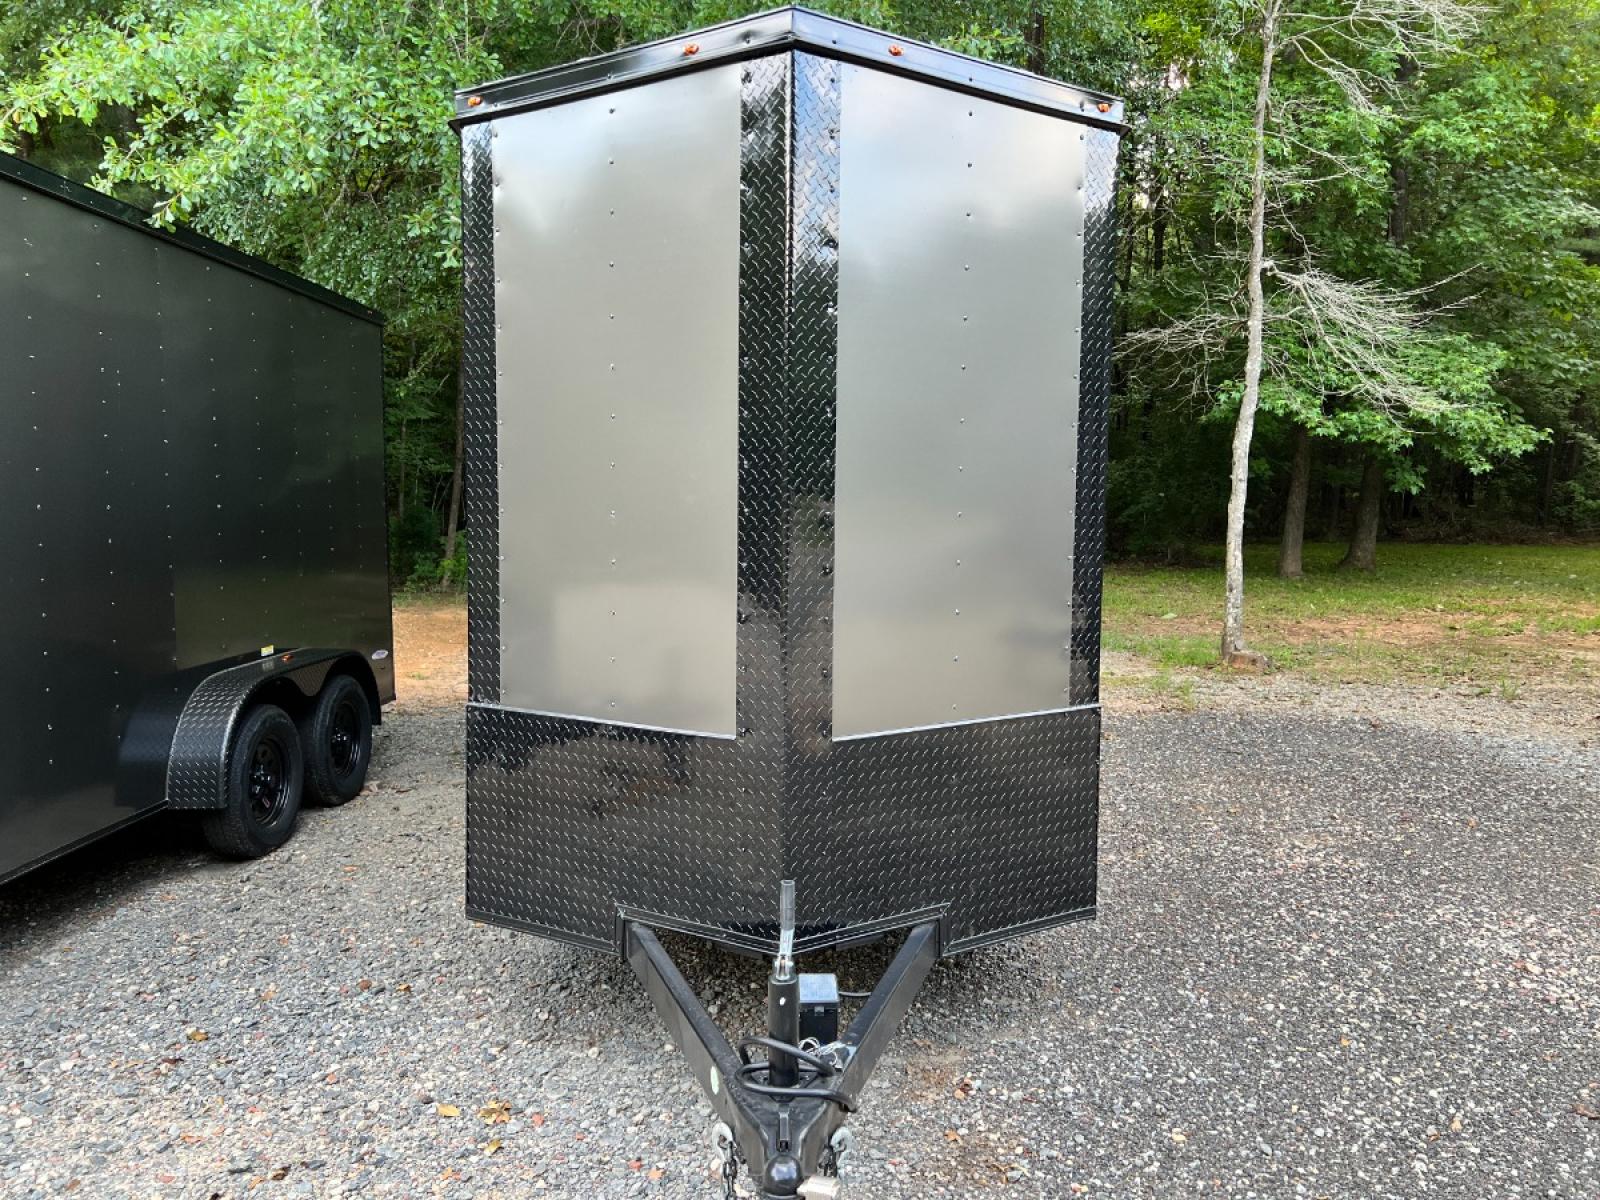 2023 Charcoal Metallic w/Black Out Pkg. Freedom Trailers 6ft X 14ft Tandem , located at 1330 Rainey Rd., Macon, 31220, (478) 960-1044, 32.845638, -83.778687 - Brand New 2023 "Top of the Line" Freedom Brand Trailer Made in South Ga. Compact Size, Great for Tools or Cycle's! Awesome 6ft X 14ft Tandem Enclosed Cycle Hauler & Cargo Trailer! Taller Inside Height is 7ft 2" Tall Inside & the Ramp Door Clearance is 6ft 8" at the Back! .080 Thick Metallic - Photo #2